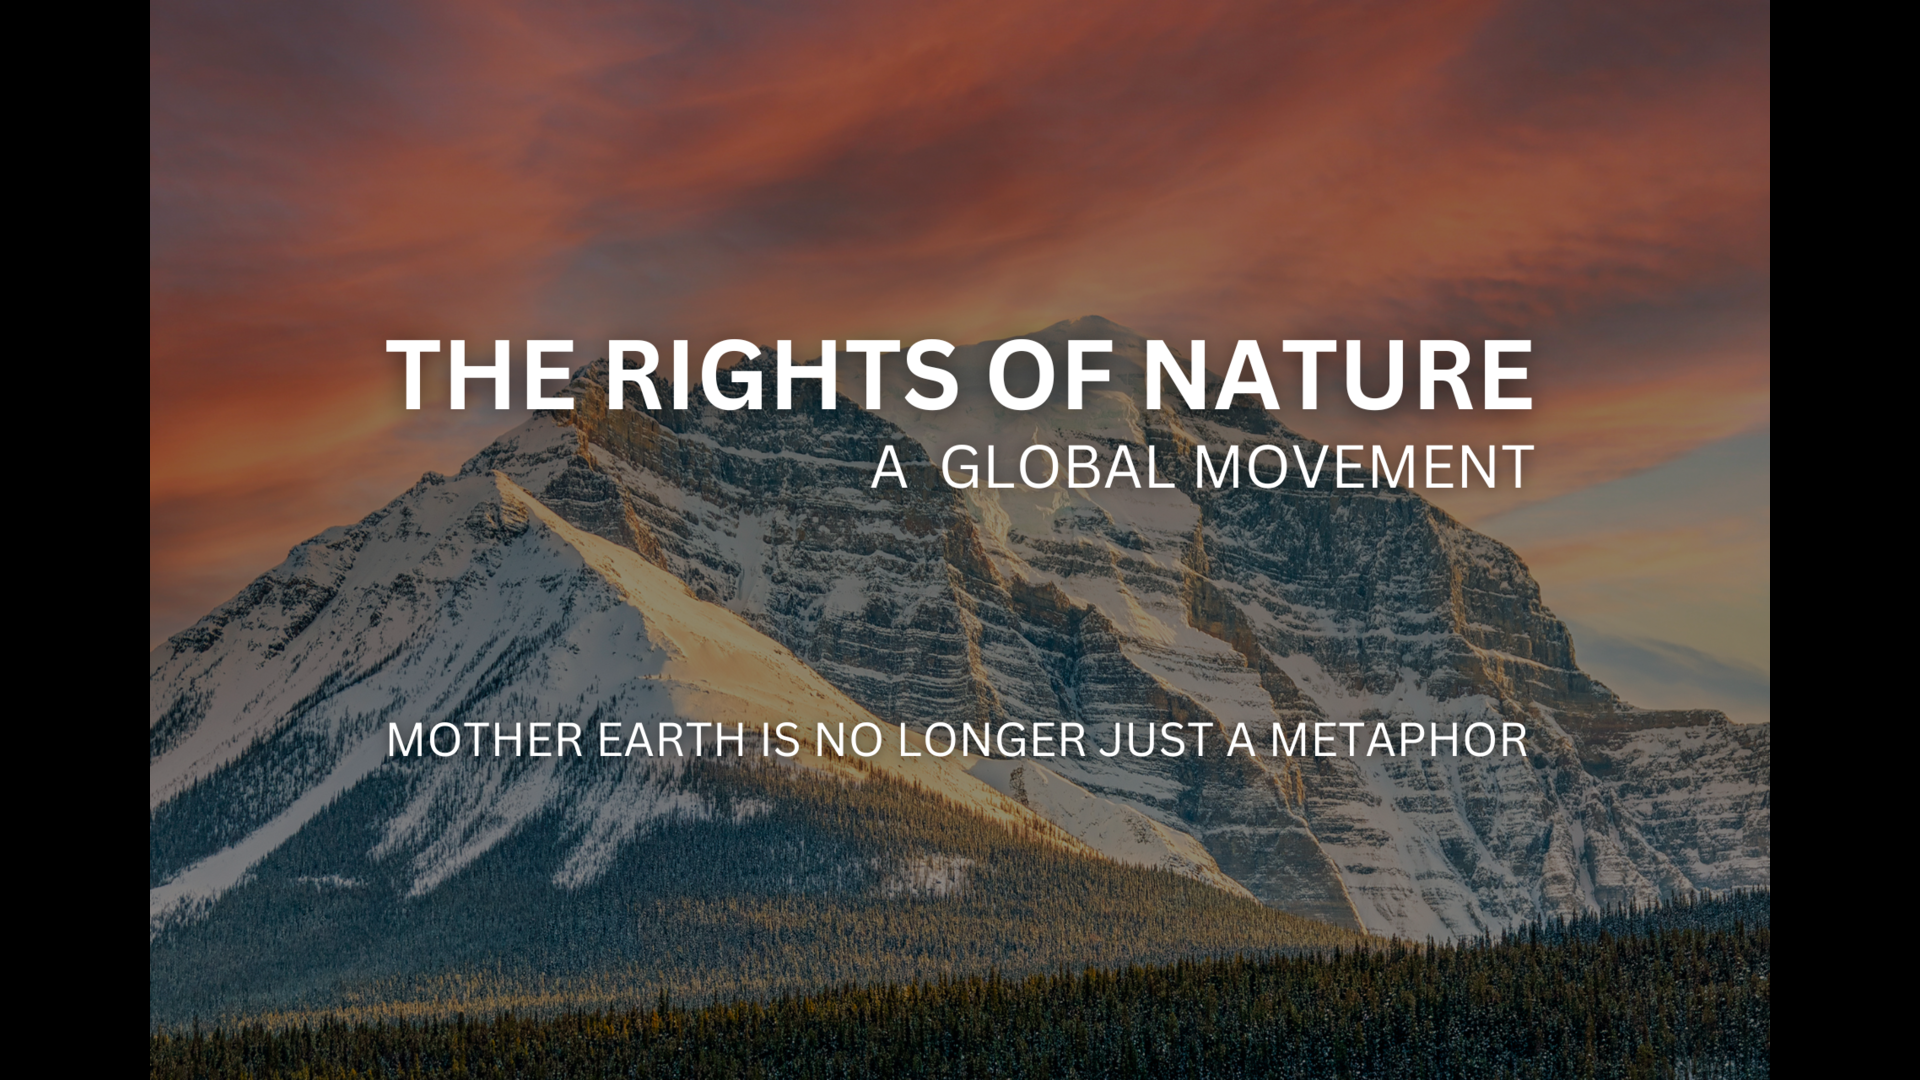 The Rights of Nature: A Global Movement